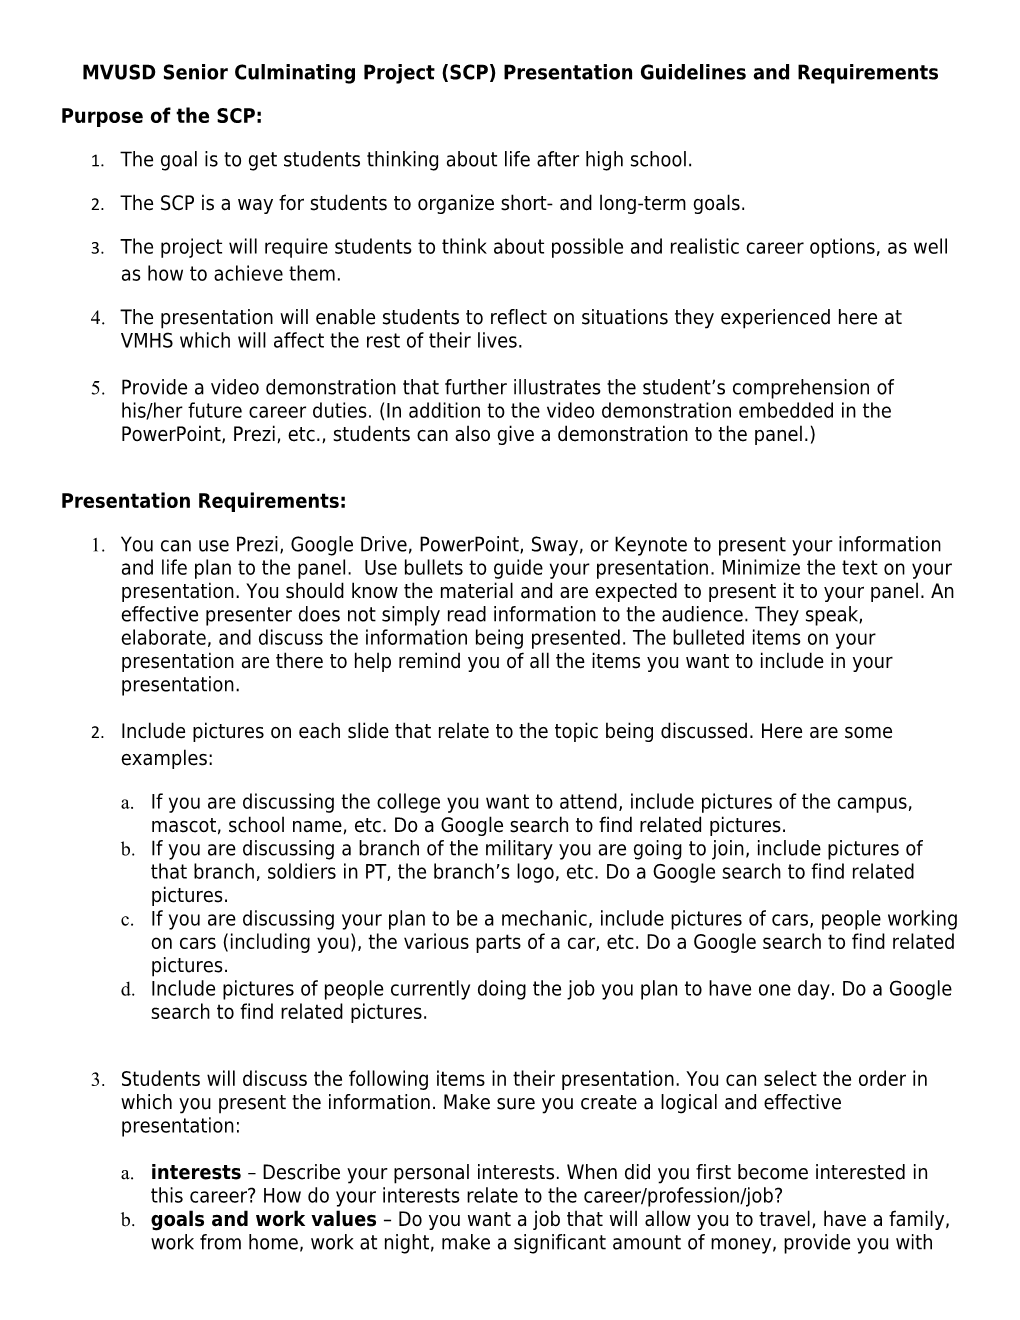 MVUSD Senior Culminating Project (SCP) Presentation Guidelines and Requirements